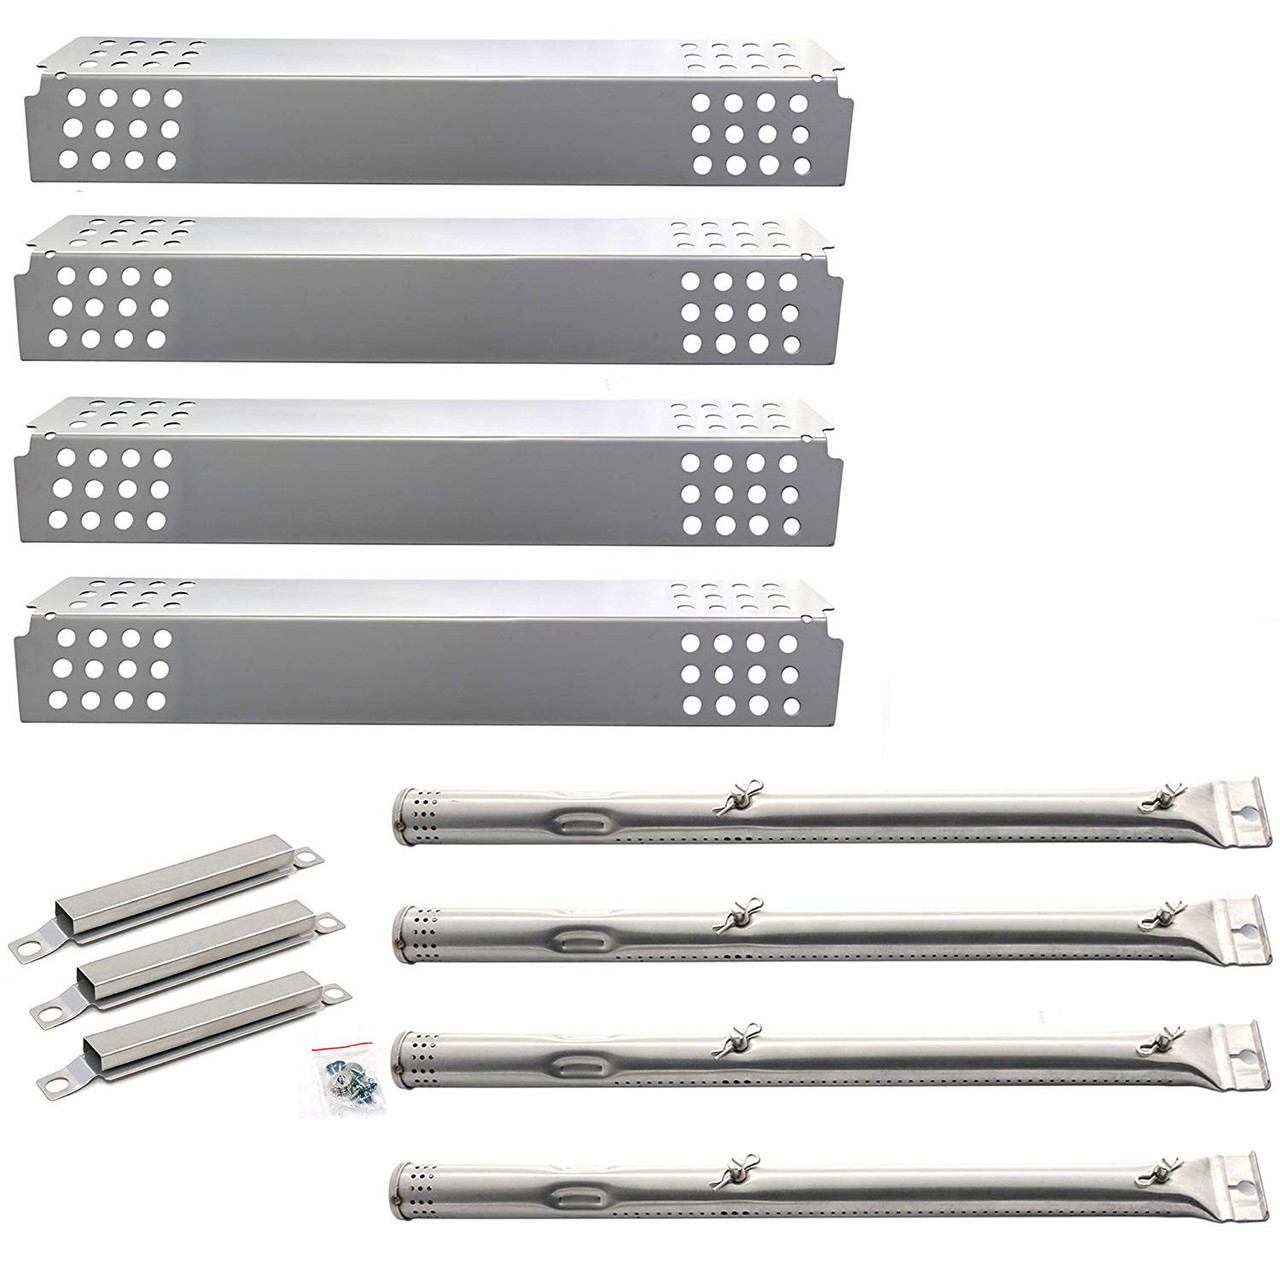 Heat Plate Shield Burners Tube Kit Replacement Gas Grill Parts for Master Forge 